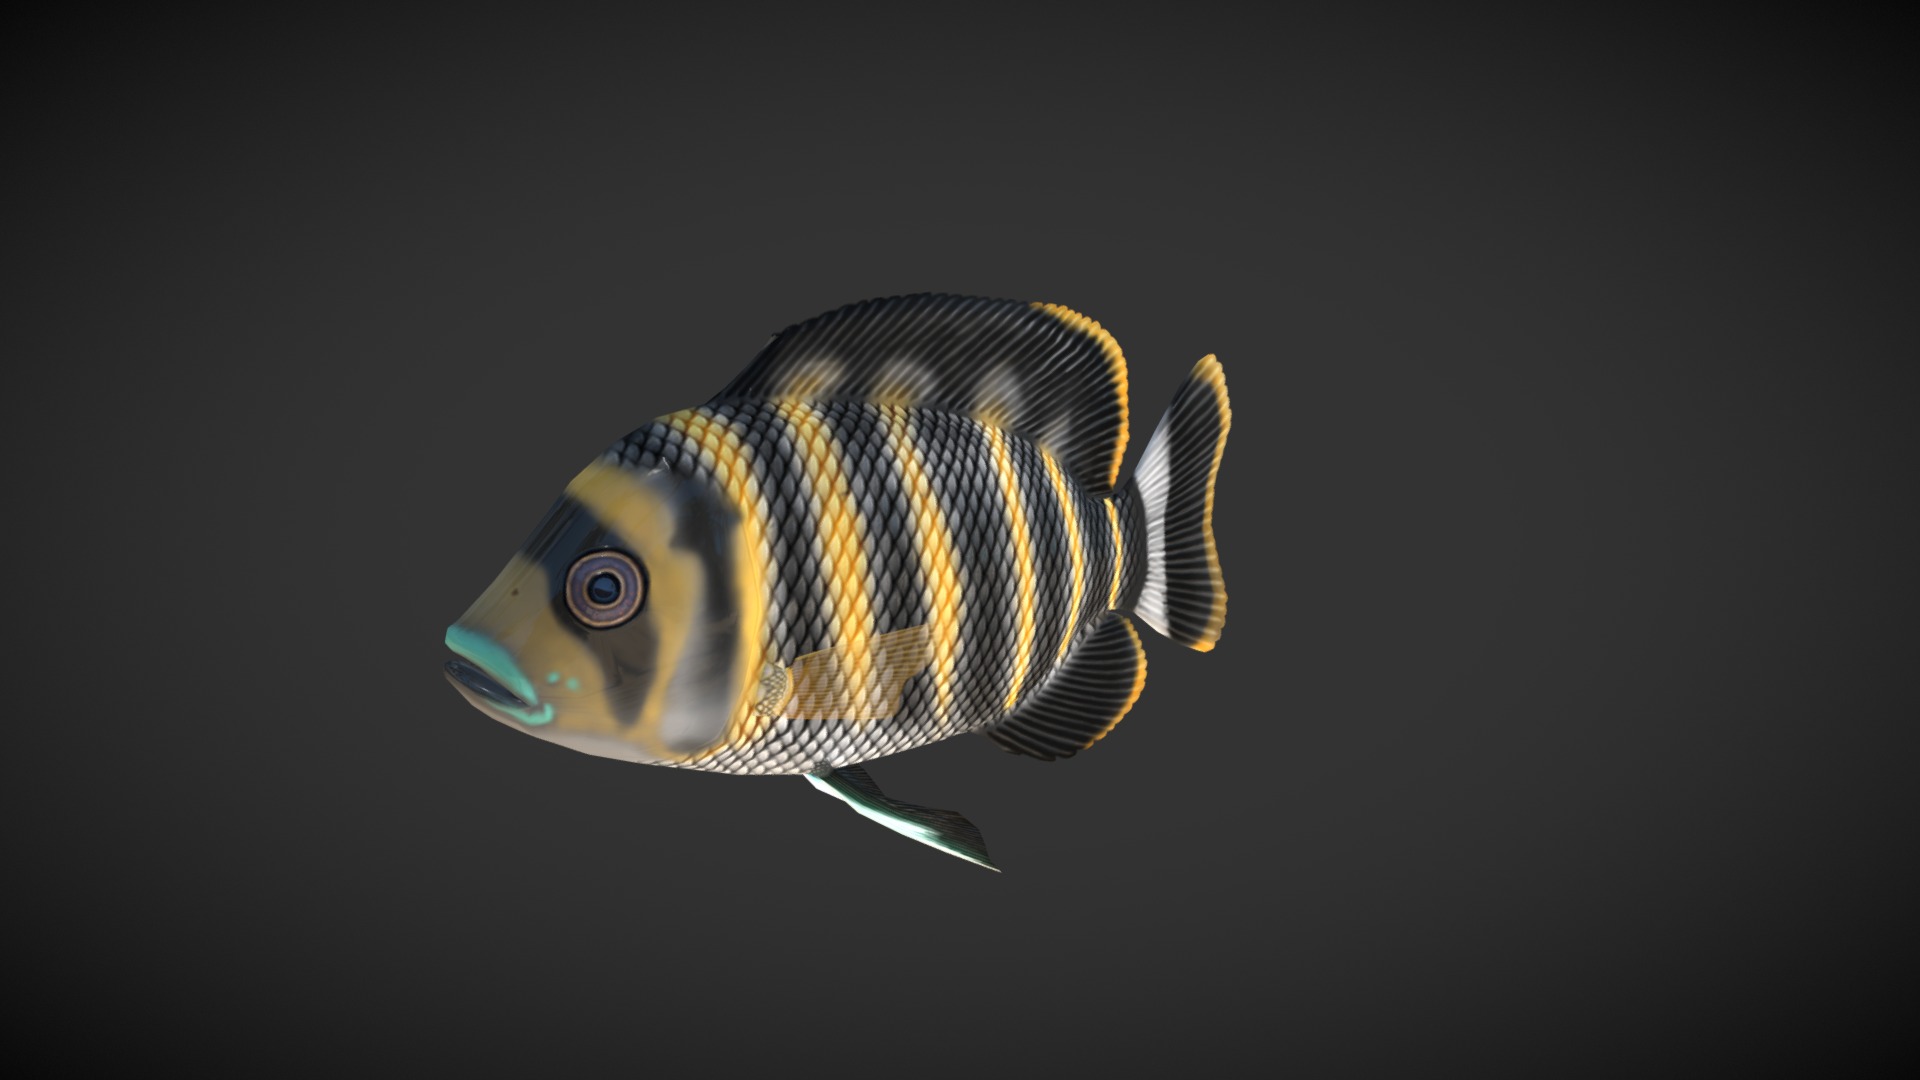 3D model Tillapia Buttikoferi fish - This is a 3D model of the Tillapia Buttikoferi fish. The 3D model is about a fish swimming in water.